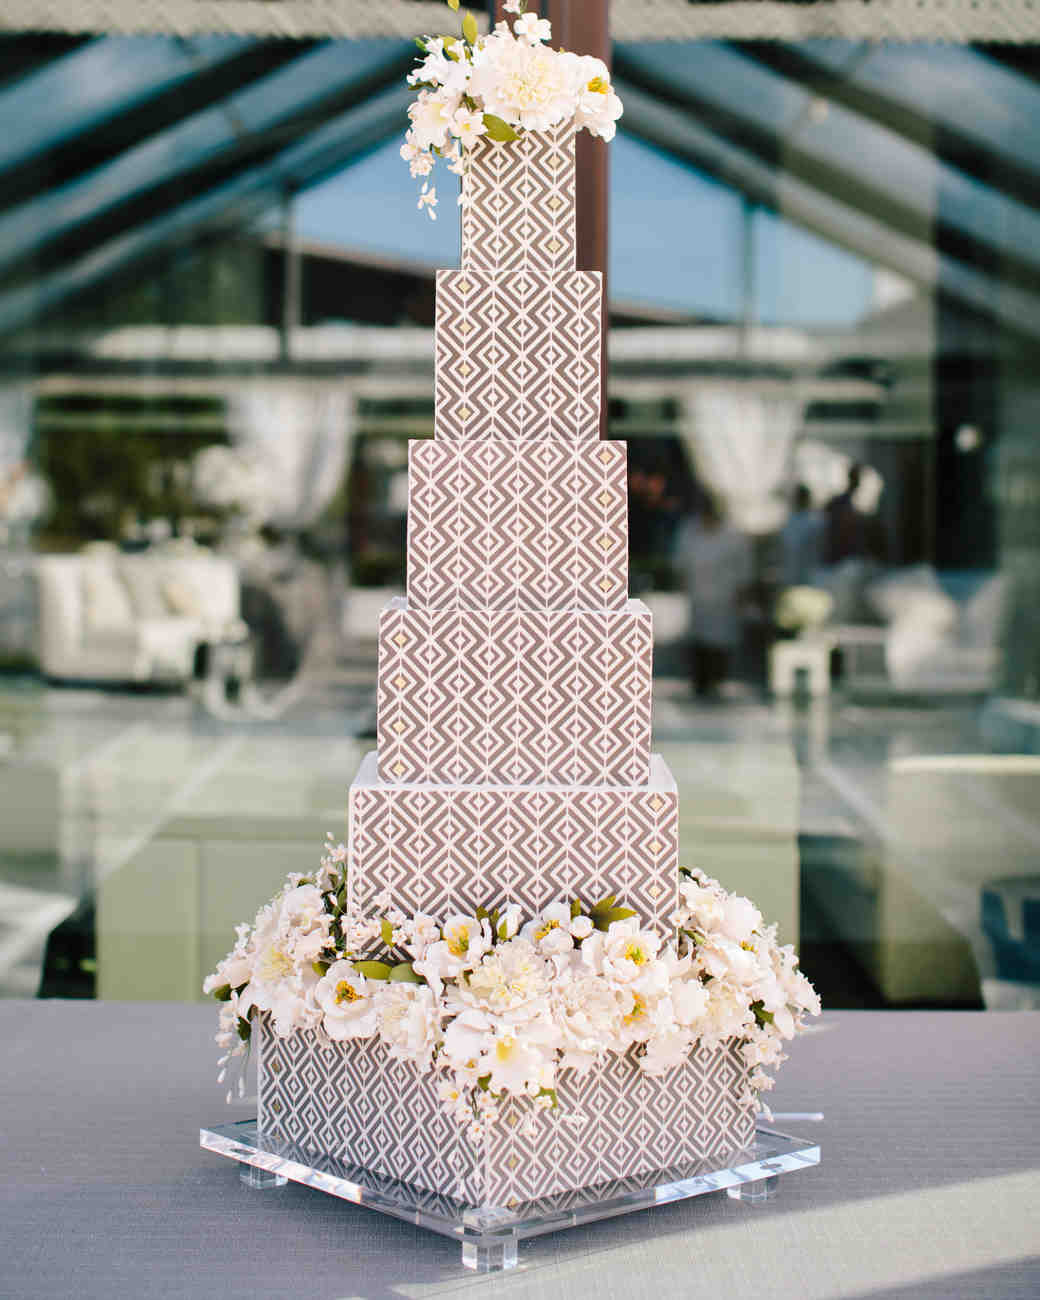 Cool Wedding Cakes
 20 Unique Wedding Cake Shapes Contemporary Couples Should